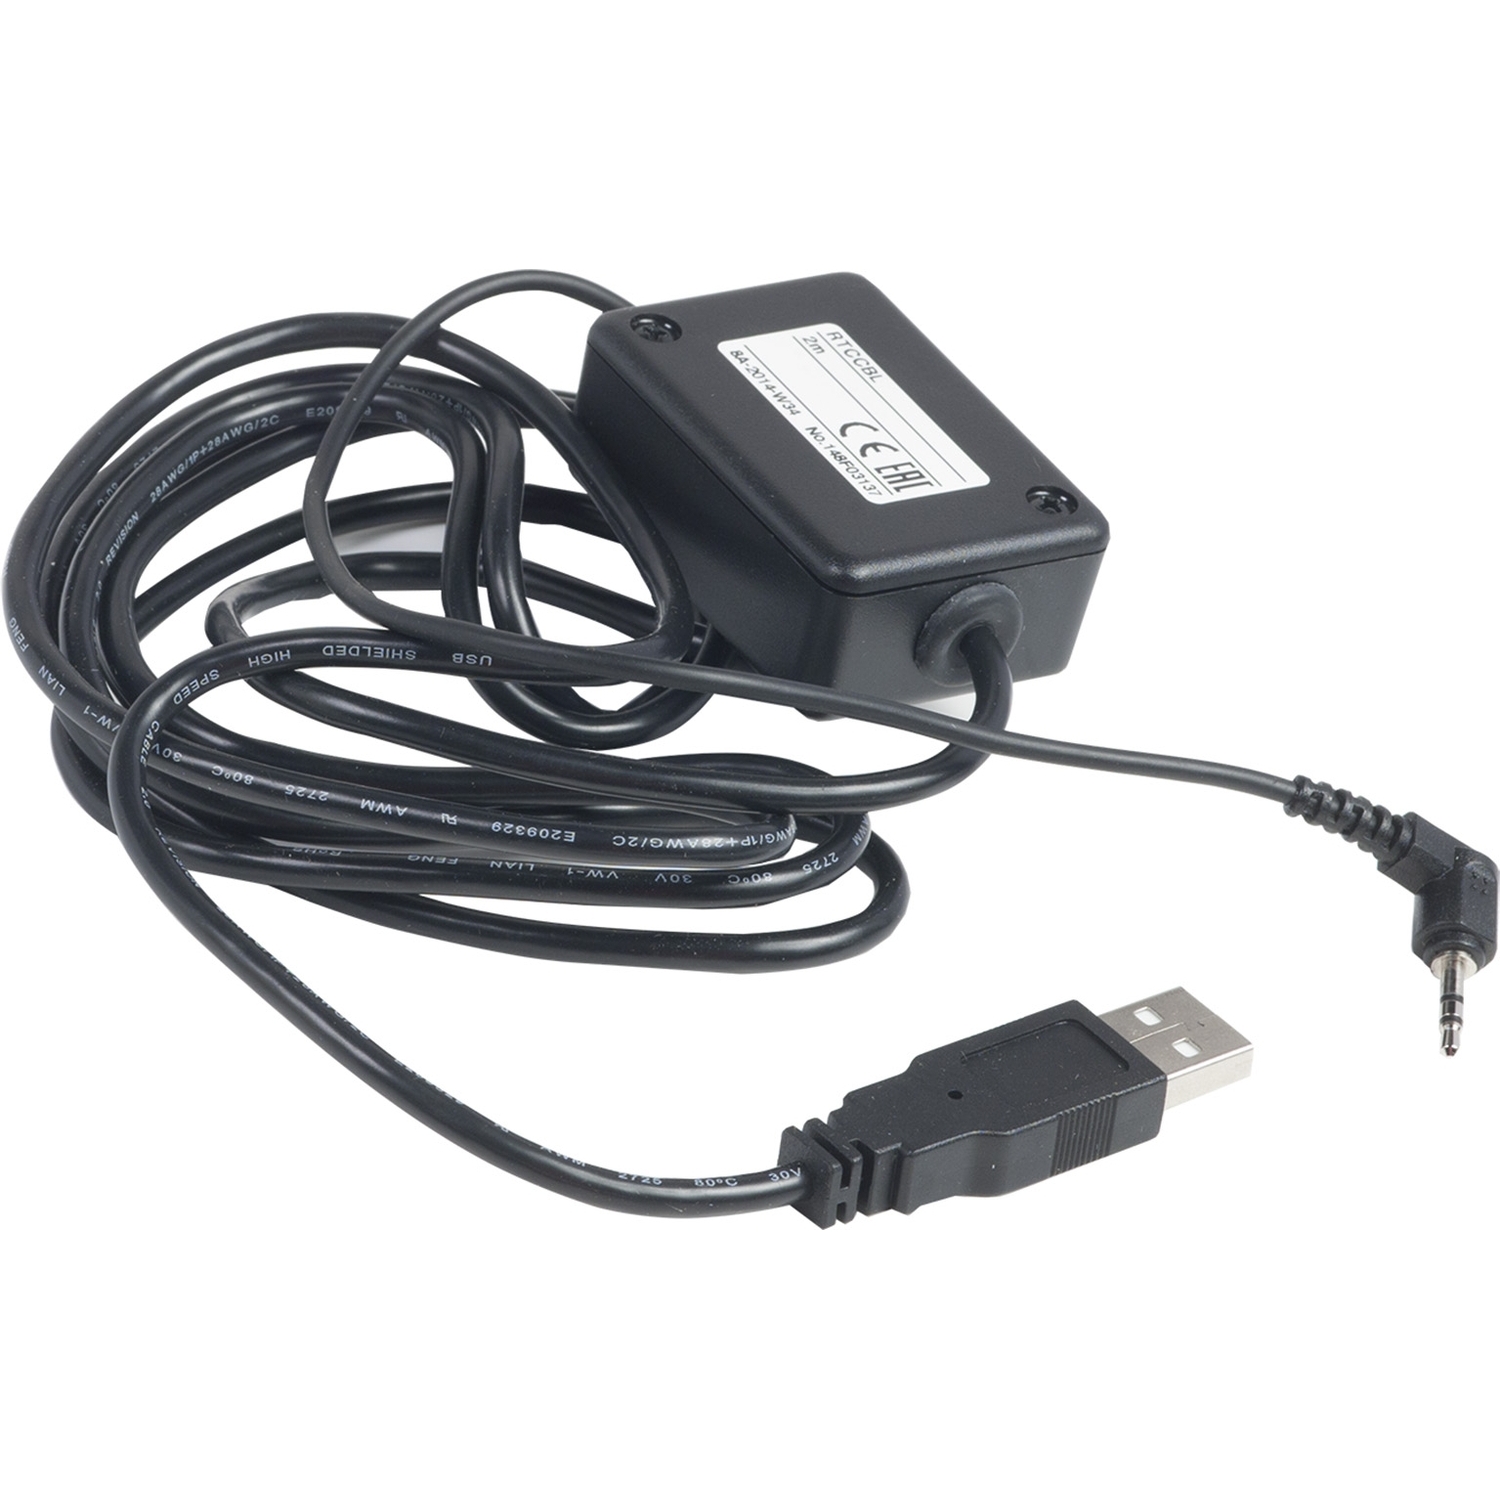 USB Cable for RTC48 temperature control relay